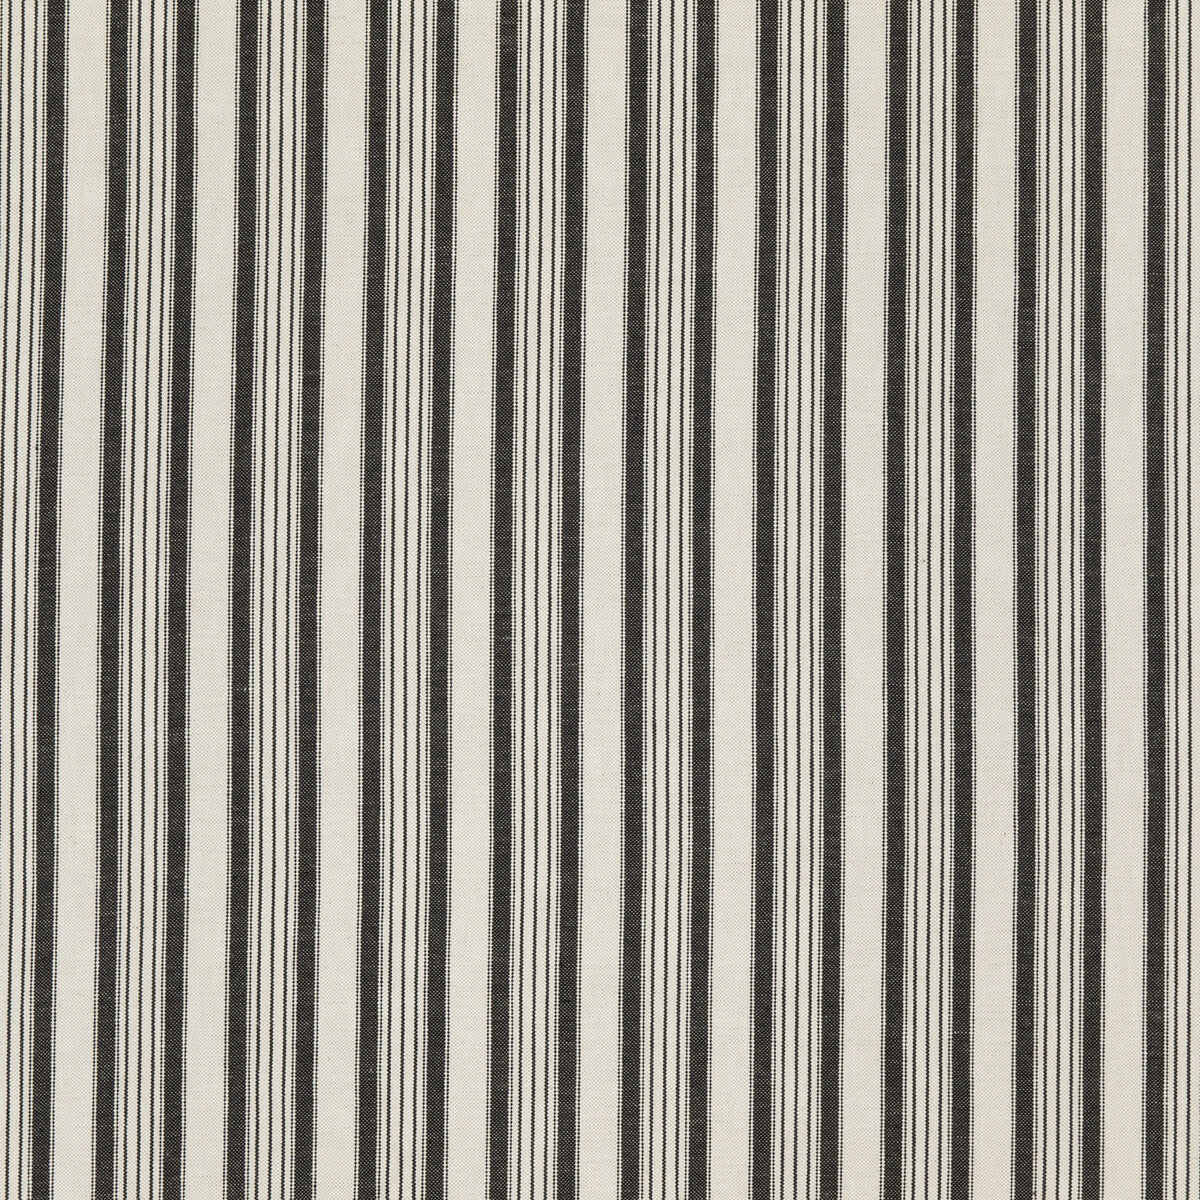 Becket fabric in ebony color - pattern ED85312.955.0 - by Threads in the Great Stripes collection